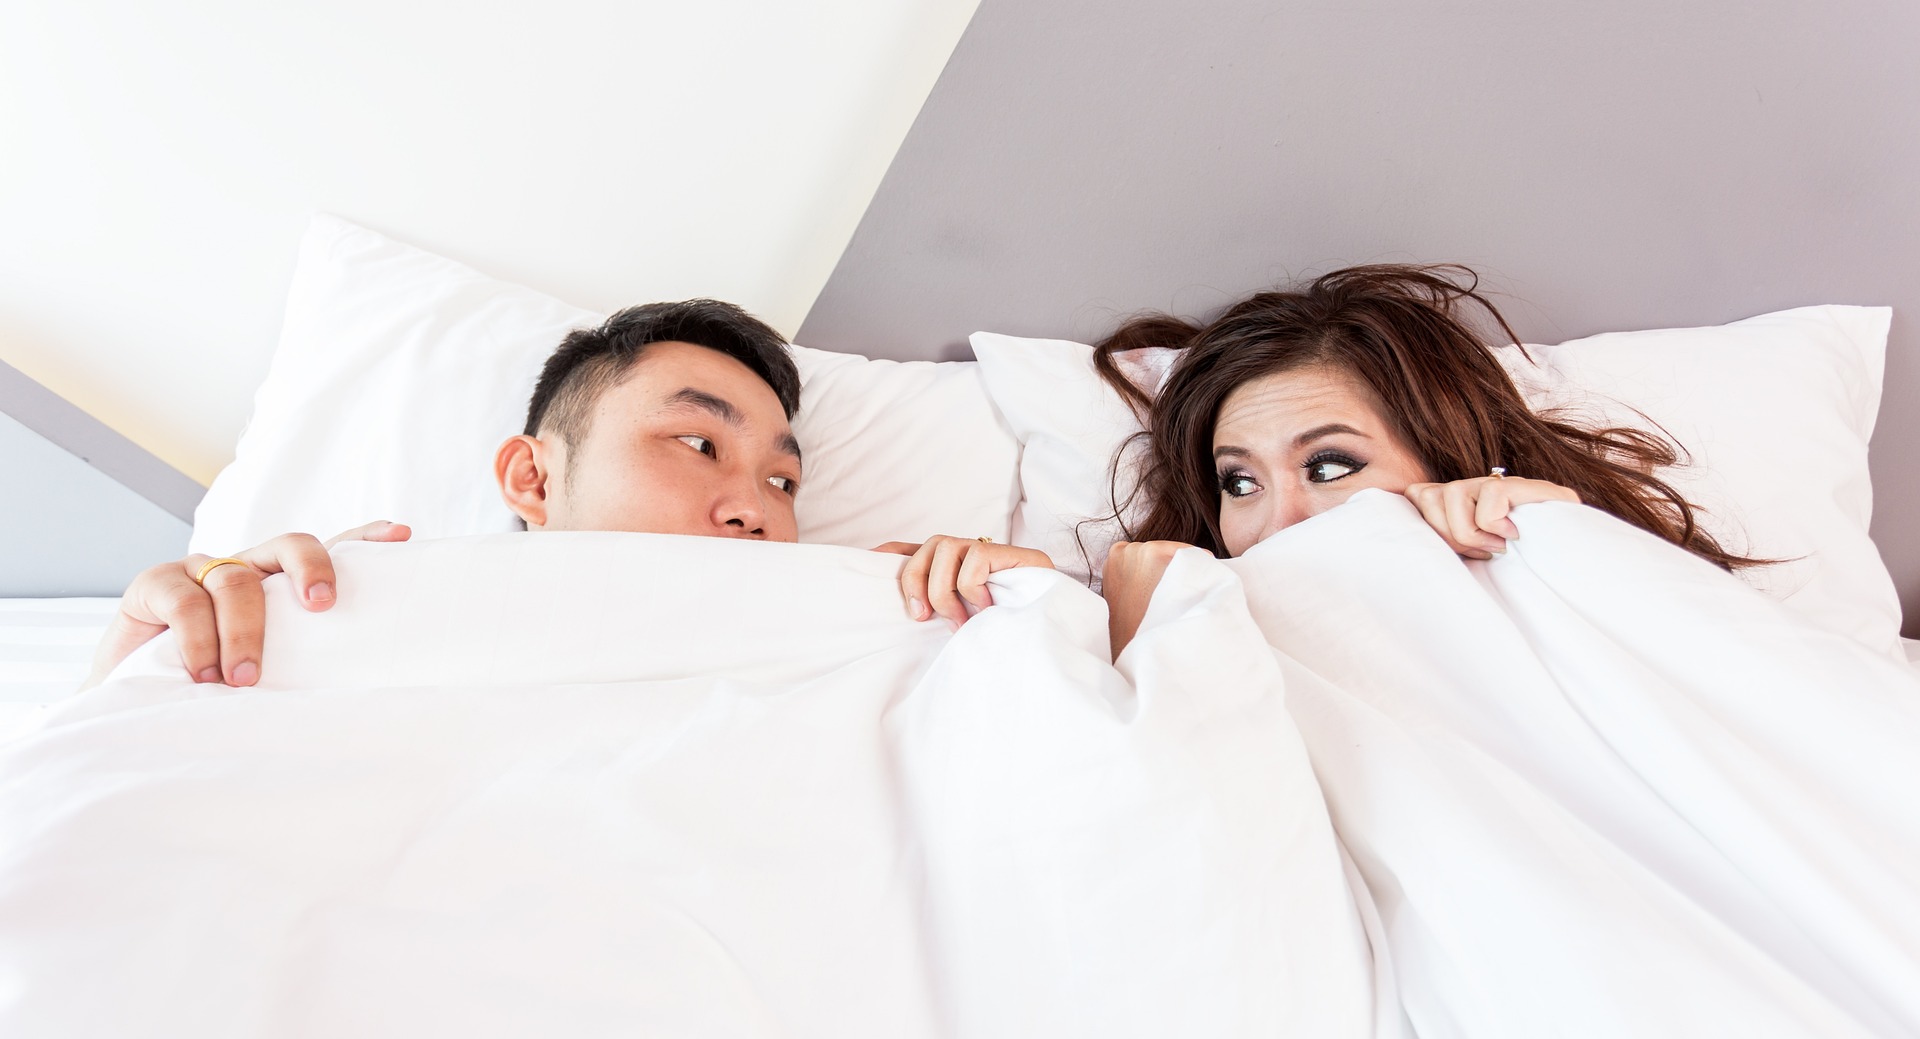 49% of Couples Would Sleep in Separate Beds to Get Better Rest